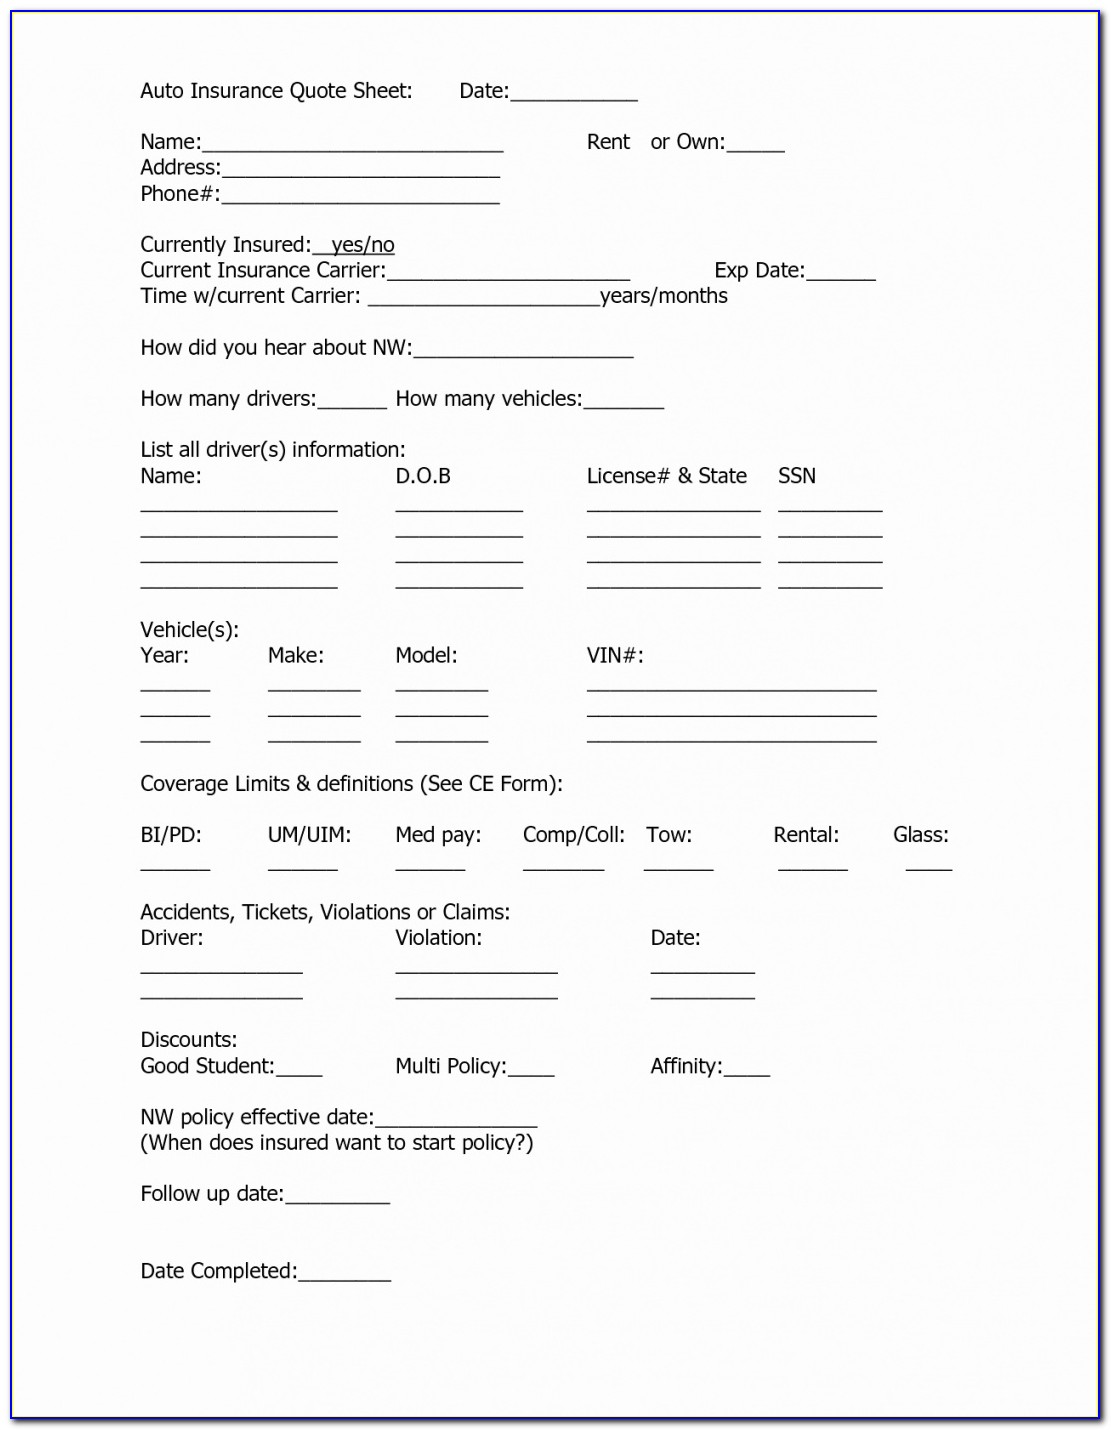 Request For Proposal Form Template Beautiful Auto Insurance Forms Insurance Proposal Template